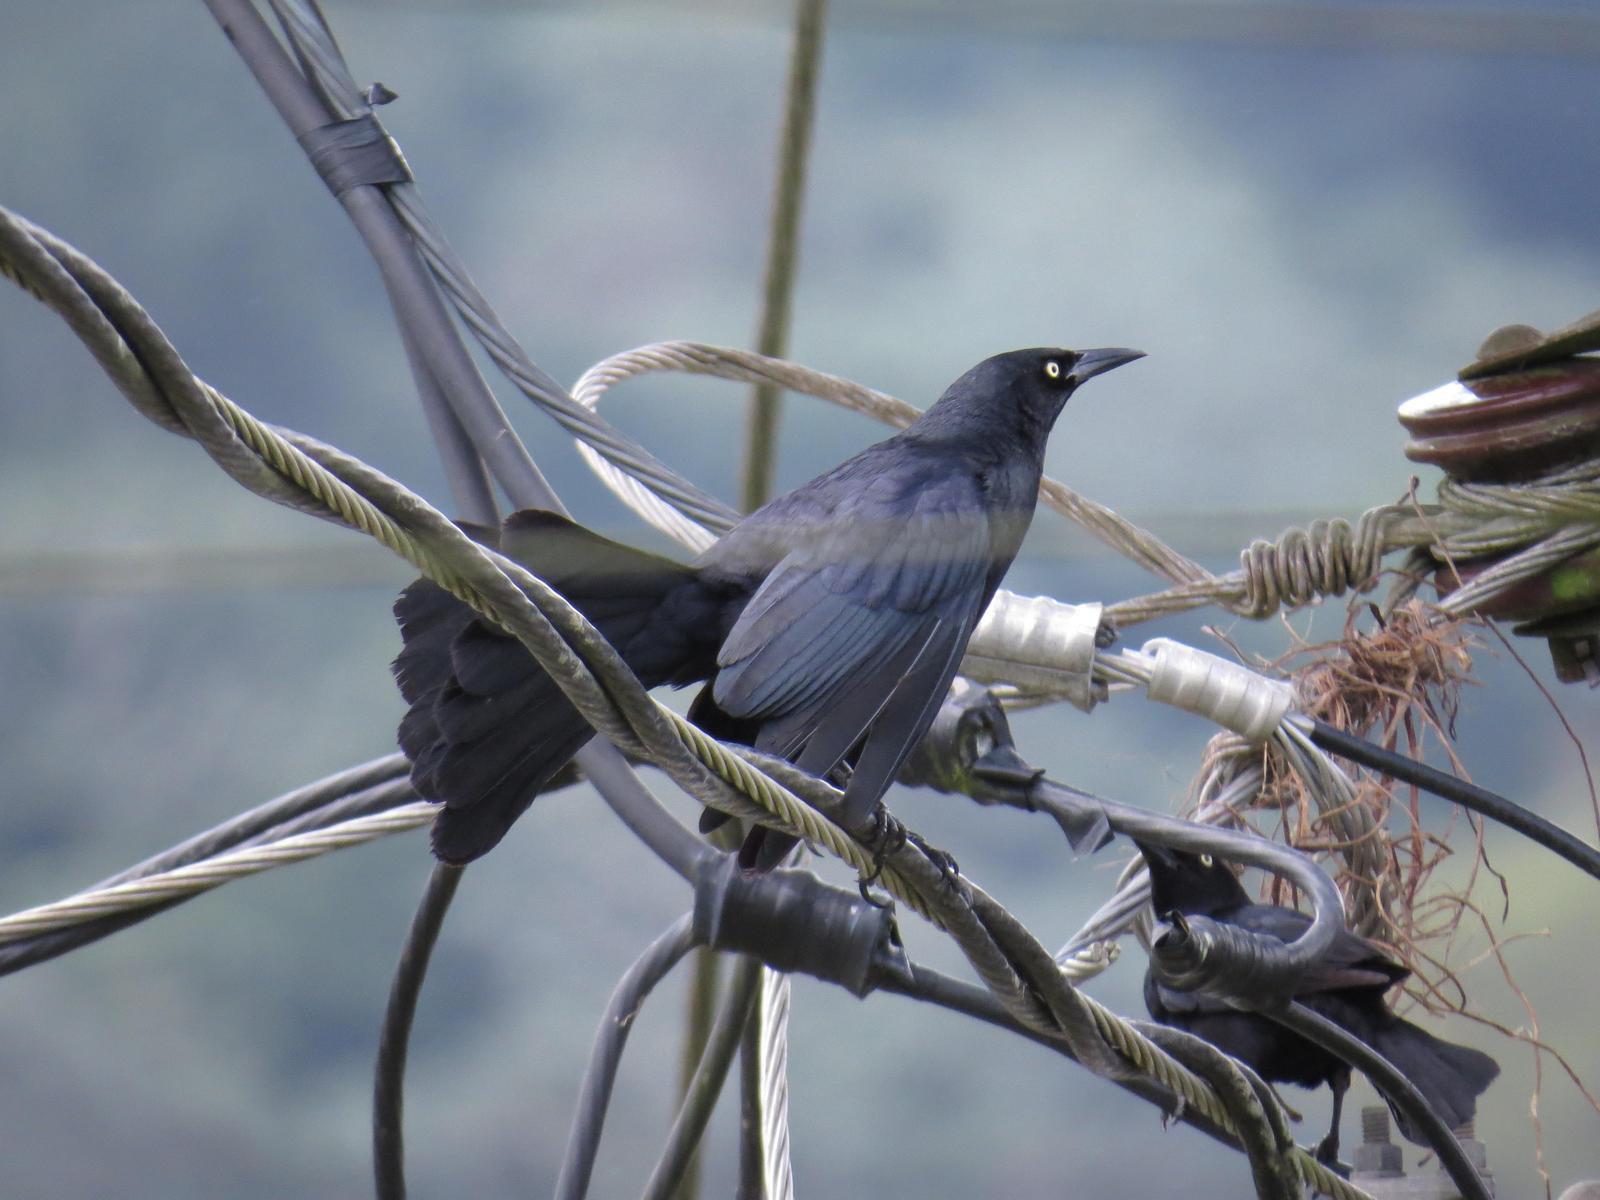 Greater Antillean Grackle Photo by Bonnie Clarfield-Bylin